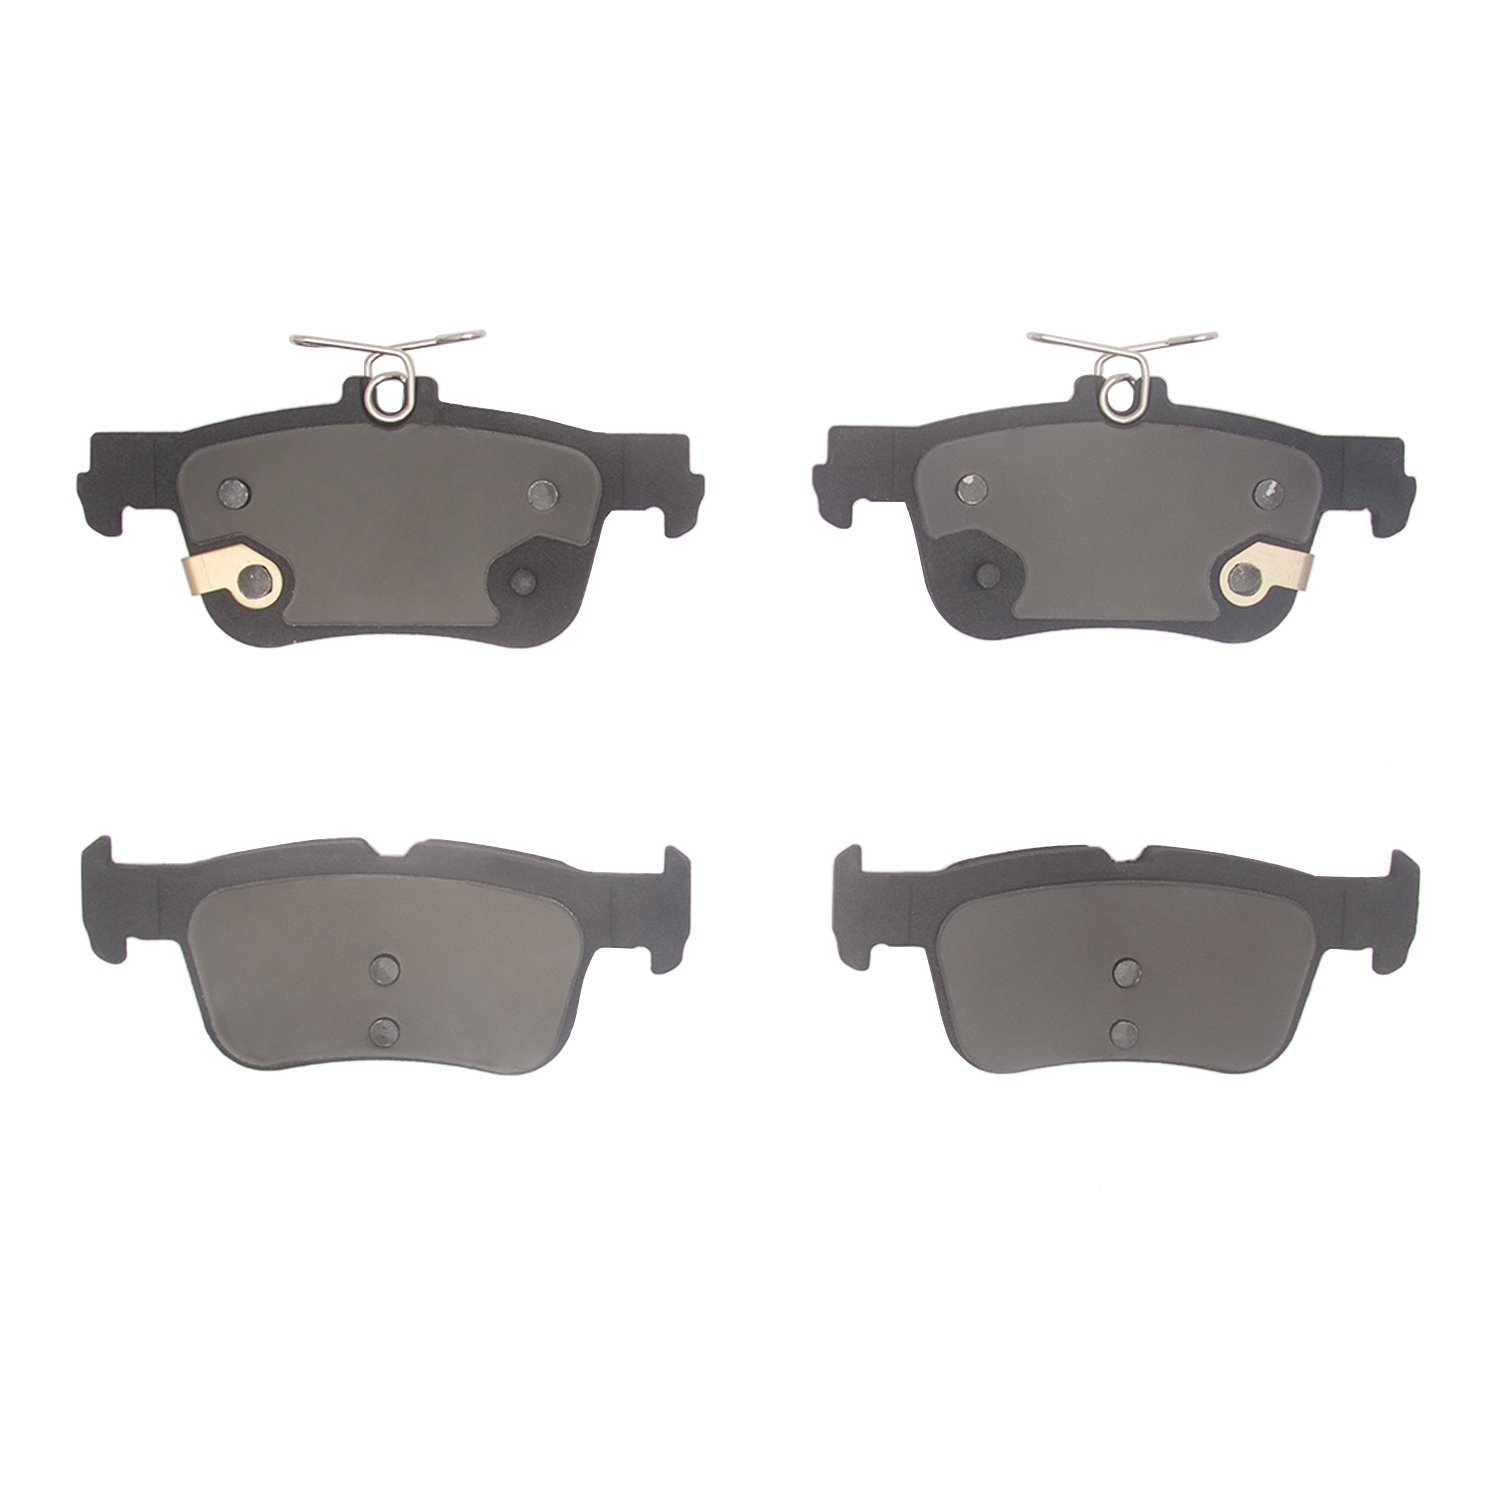 1551-2384-00 5000 Advanced Low-Metallic Brake Pads, Fits Select Ford/Lincoln/Mercury/Mazda, Position: Rear